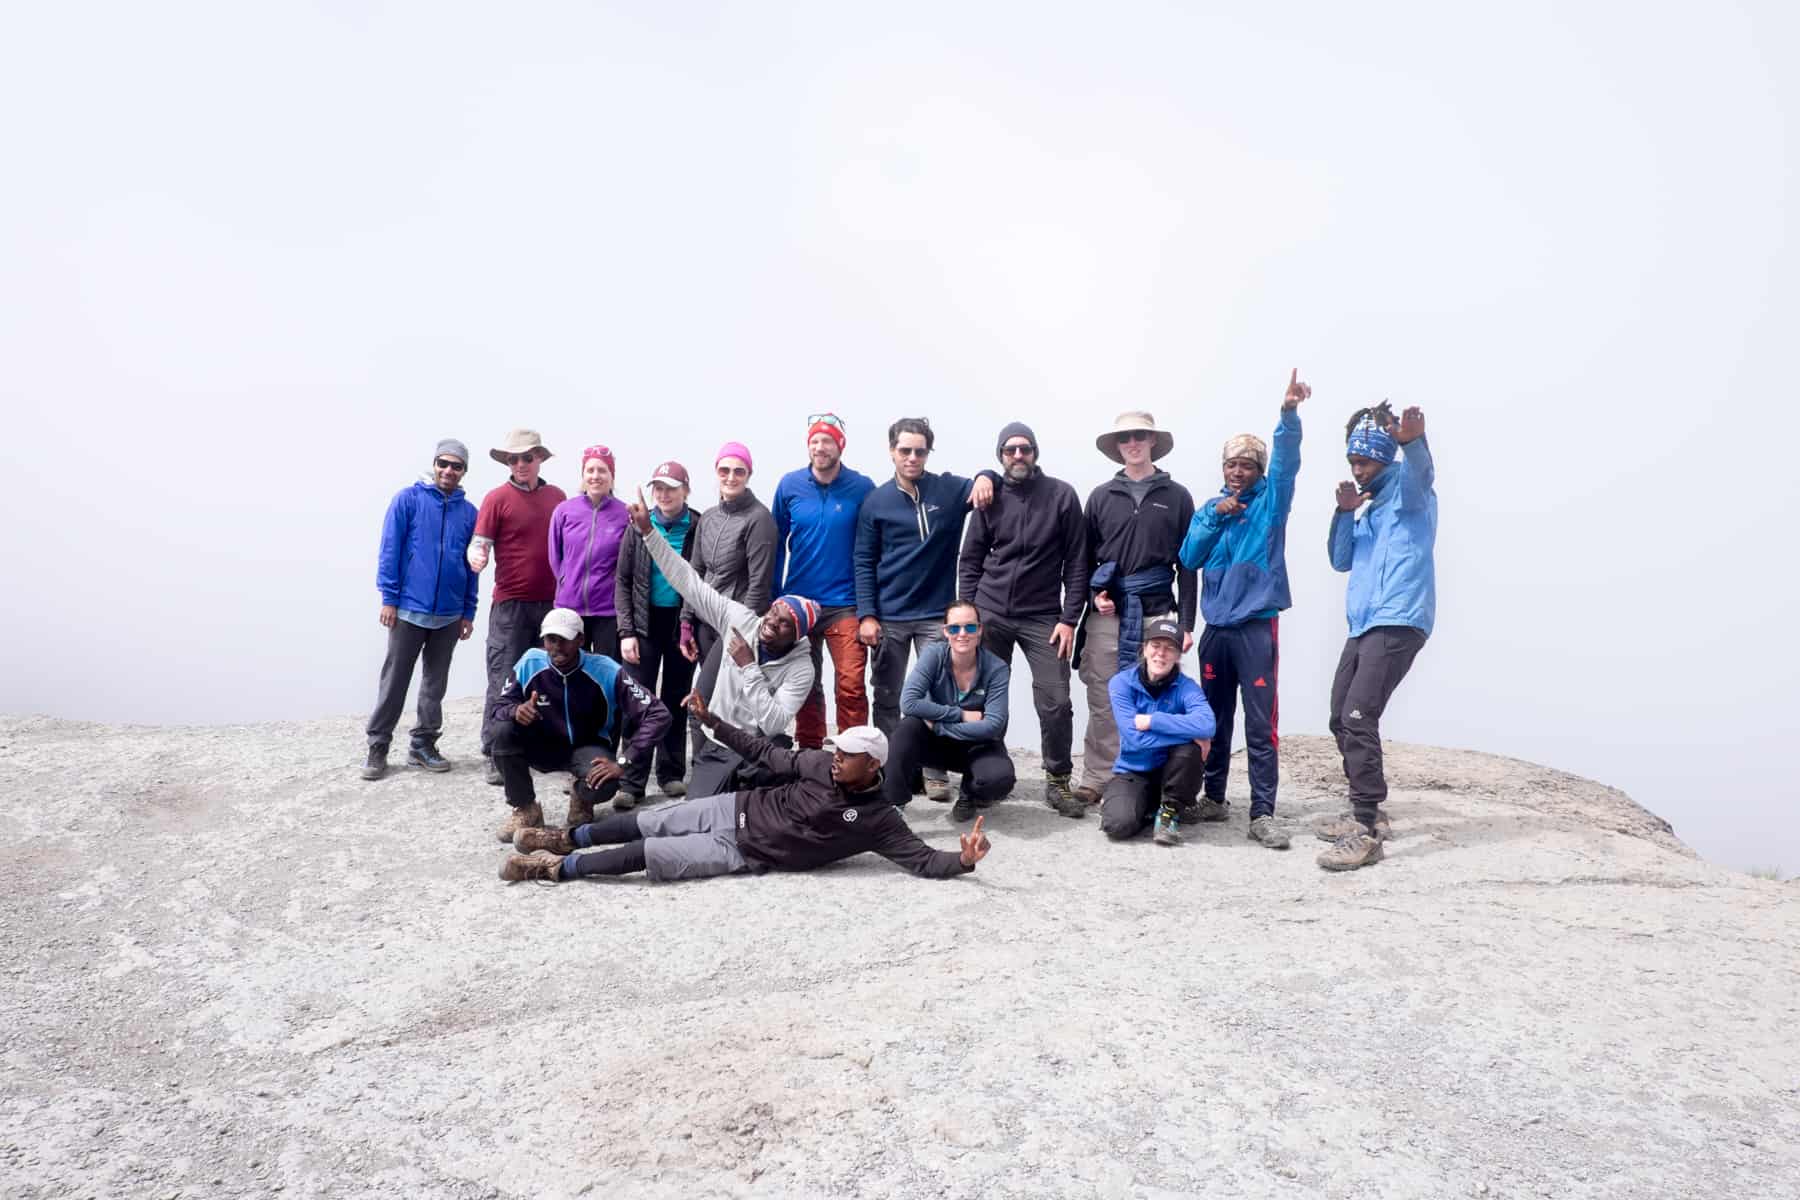 A group of trekkers posing for a photos at the top of a cloud covered rock, when climbing Kilimanjaro